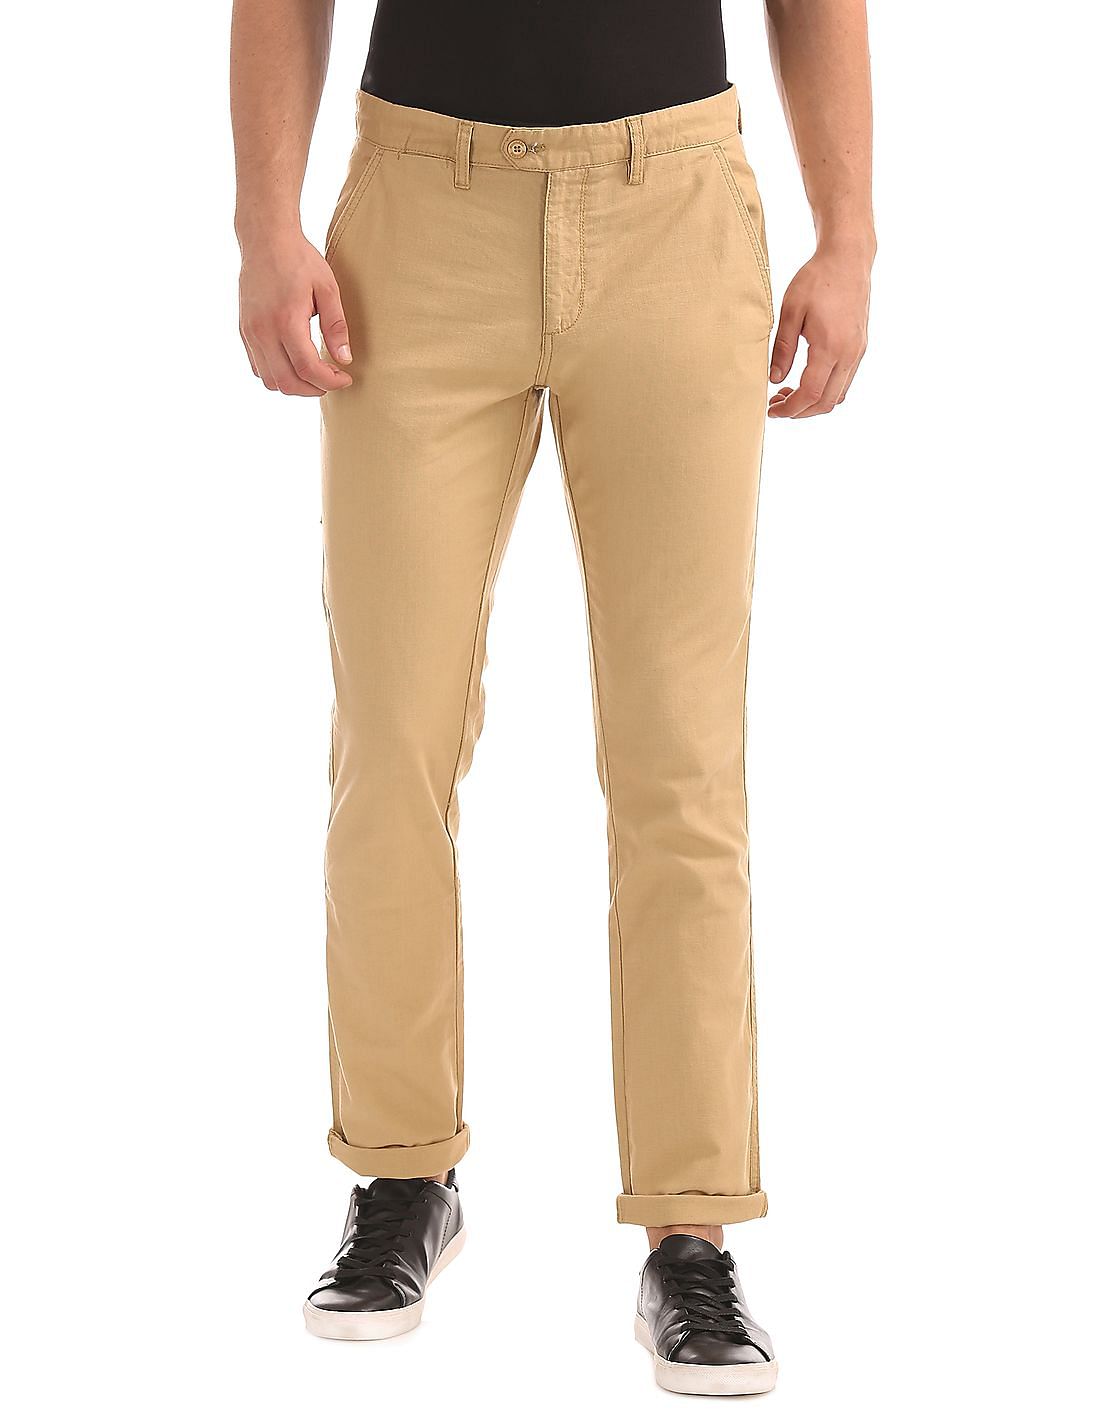 Buy Regular Fit Men Trousers Pink and Brown Combo of 2 Polyester Blend for  Best Price Reviews Free Shipping